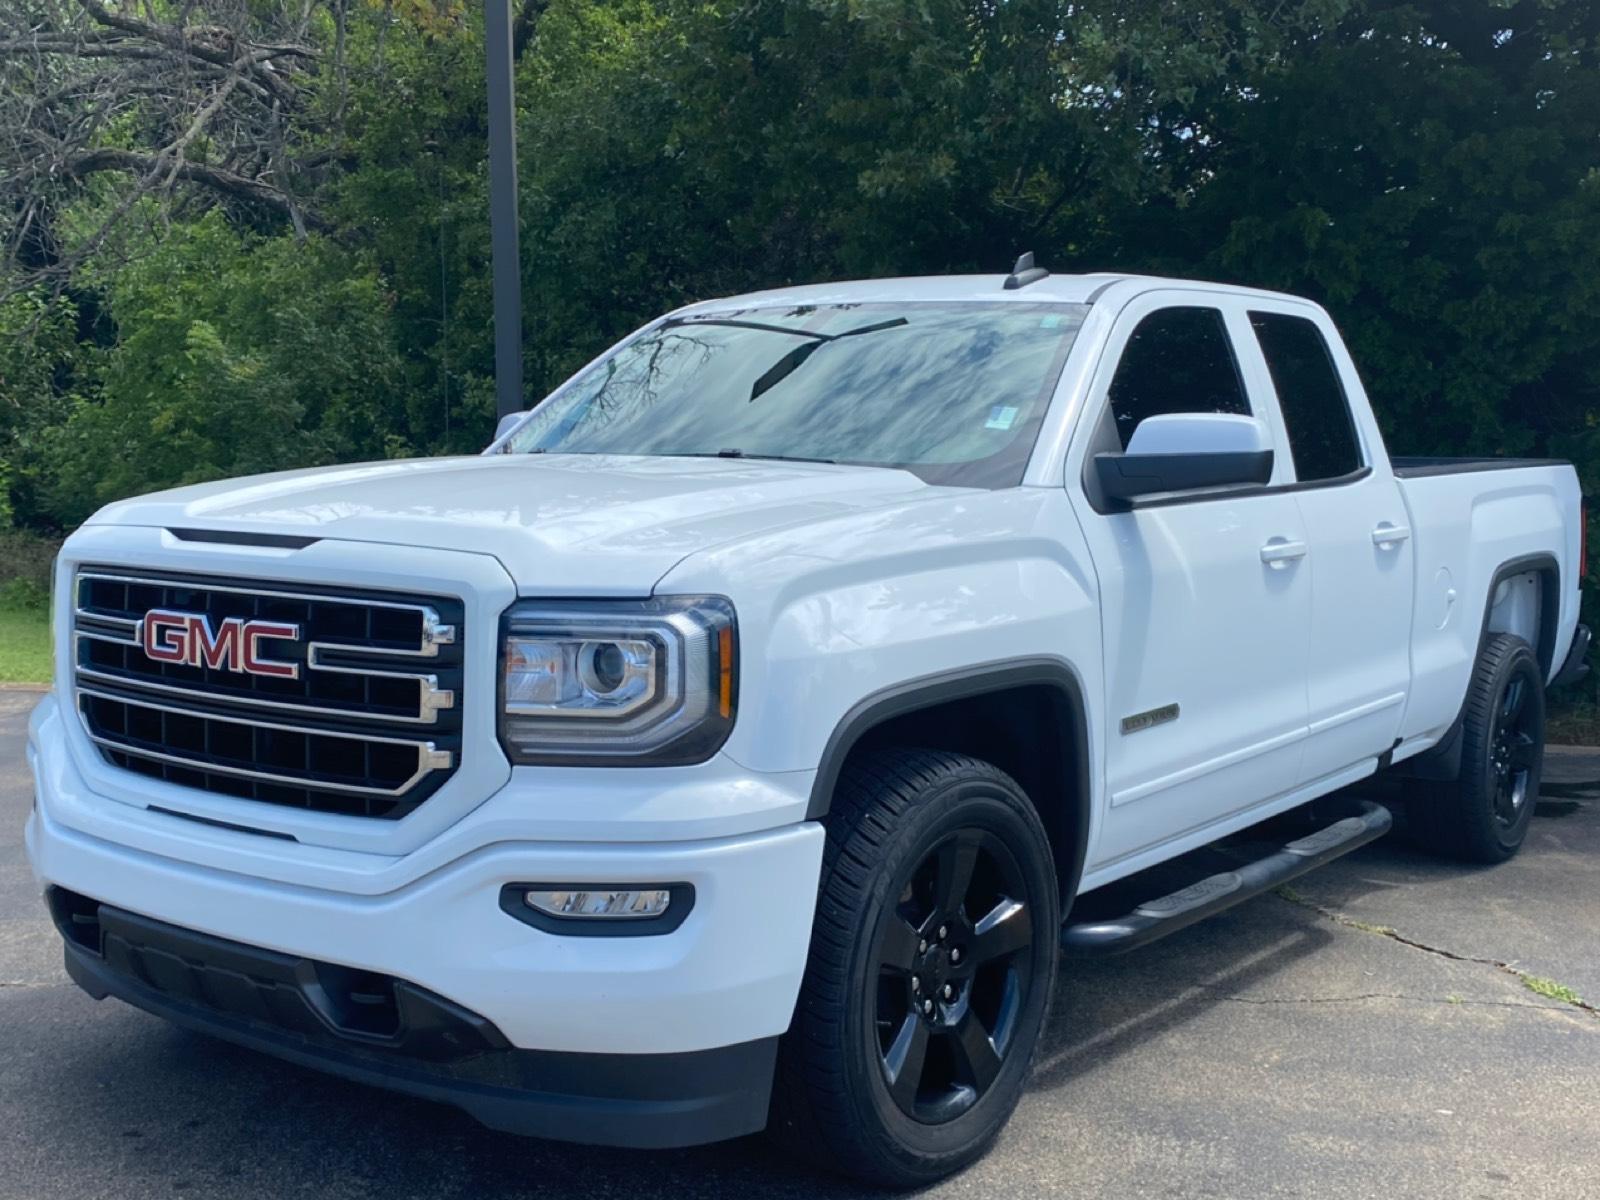 PreOwned 2018 GMC Sierra 1500 2WD Double Cab 143.5 Extended Cab Pickup